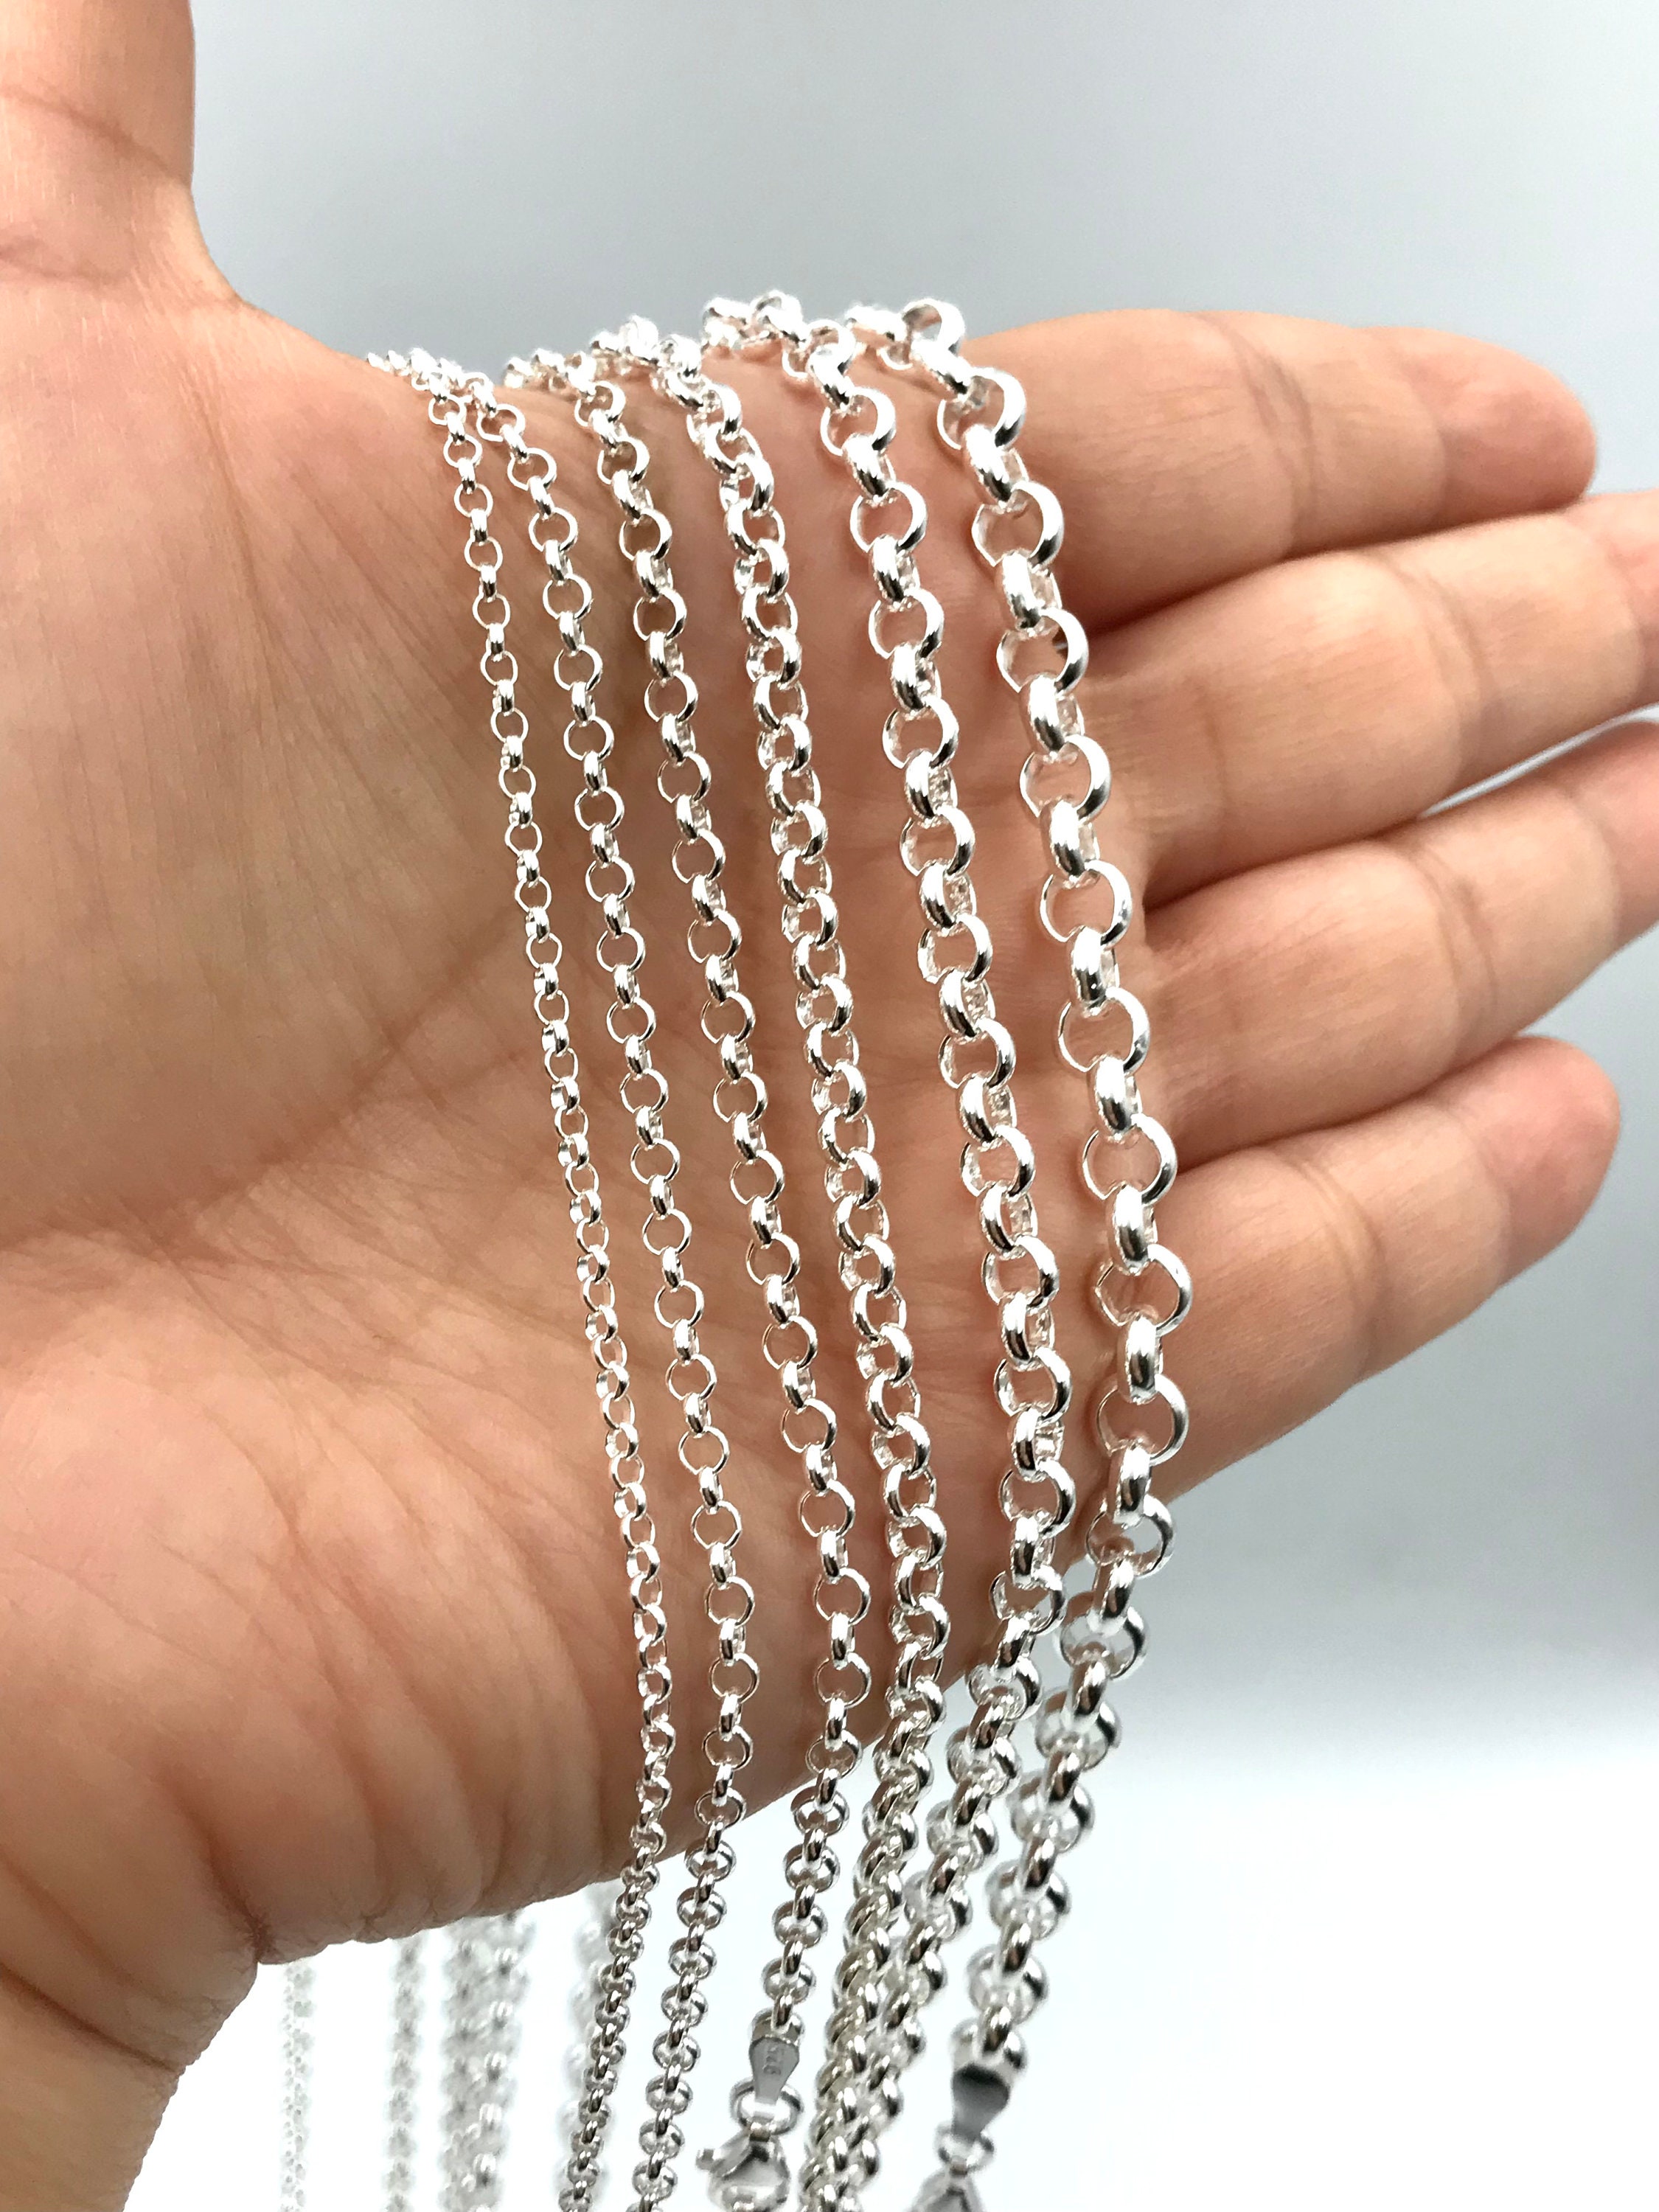 Stainless Steel Rolo Chain, Jewelry Making Chain, Bulk Chain, Stainless  Chain, 7mm Round Open Links, Lot Size 2 to 10 Feet, 1945 